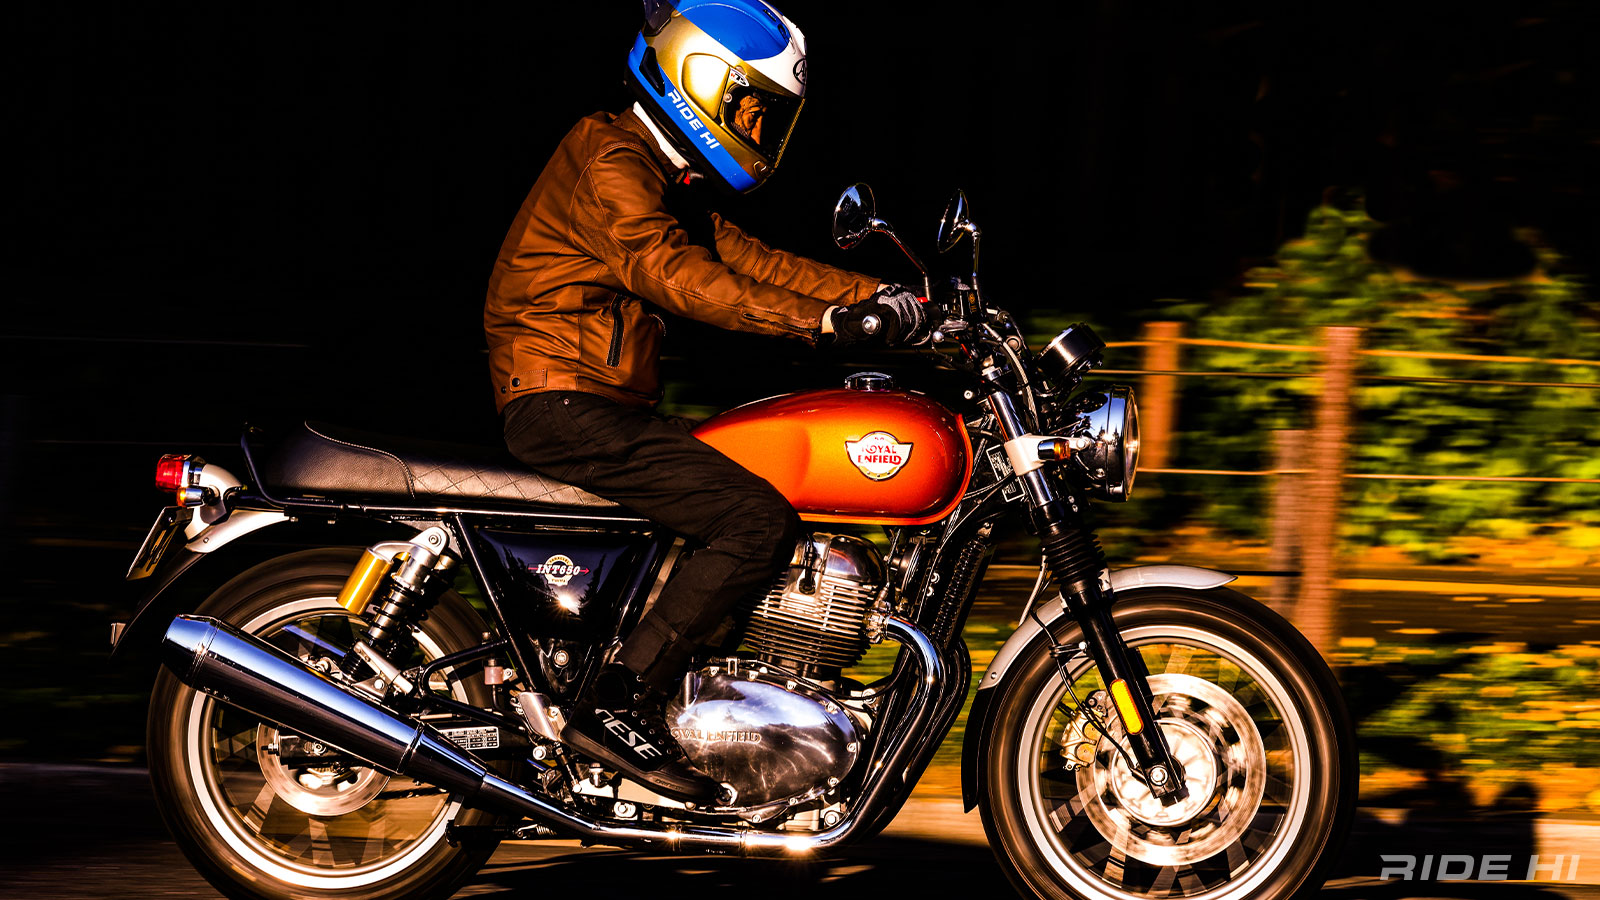 royalenfield_int650_211130_03